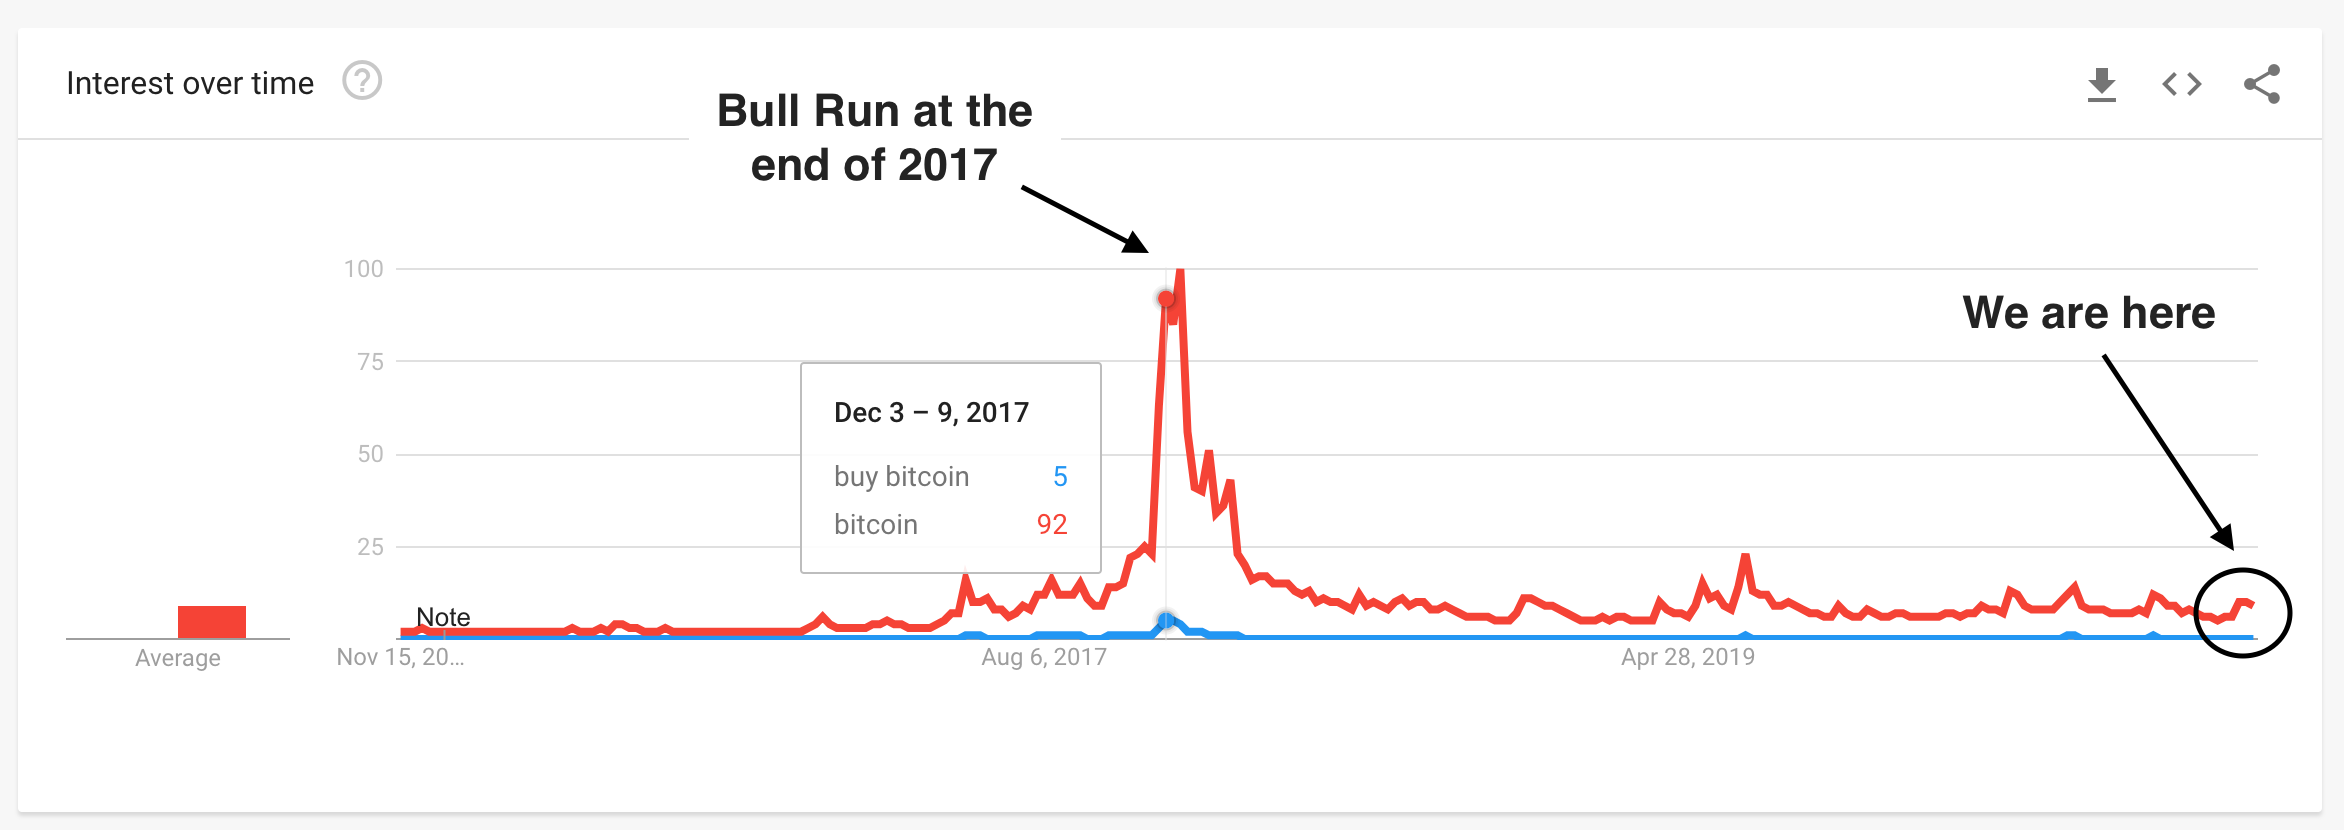 buy bitcoin interest over time